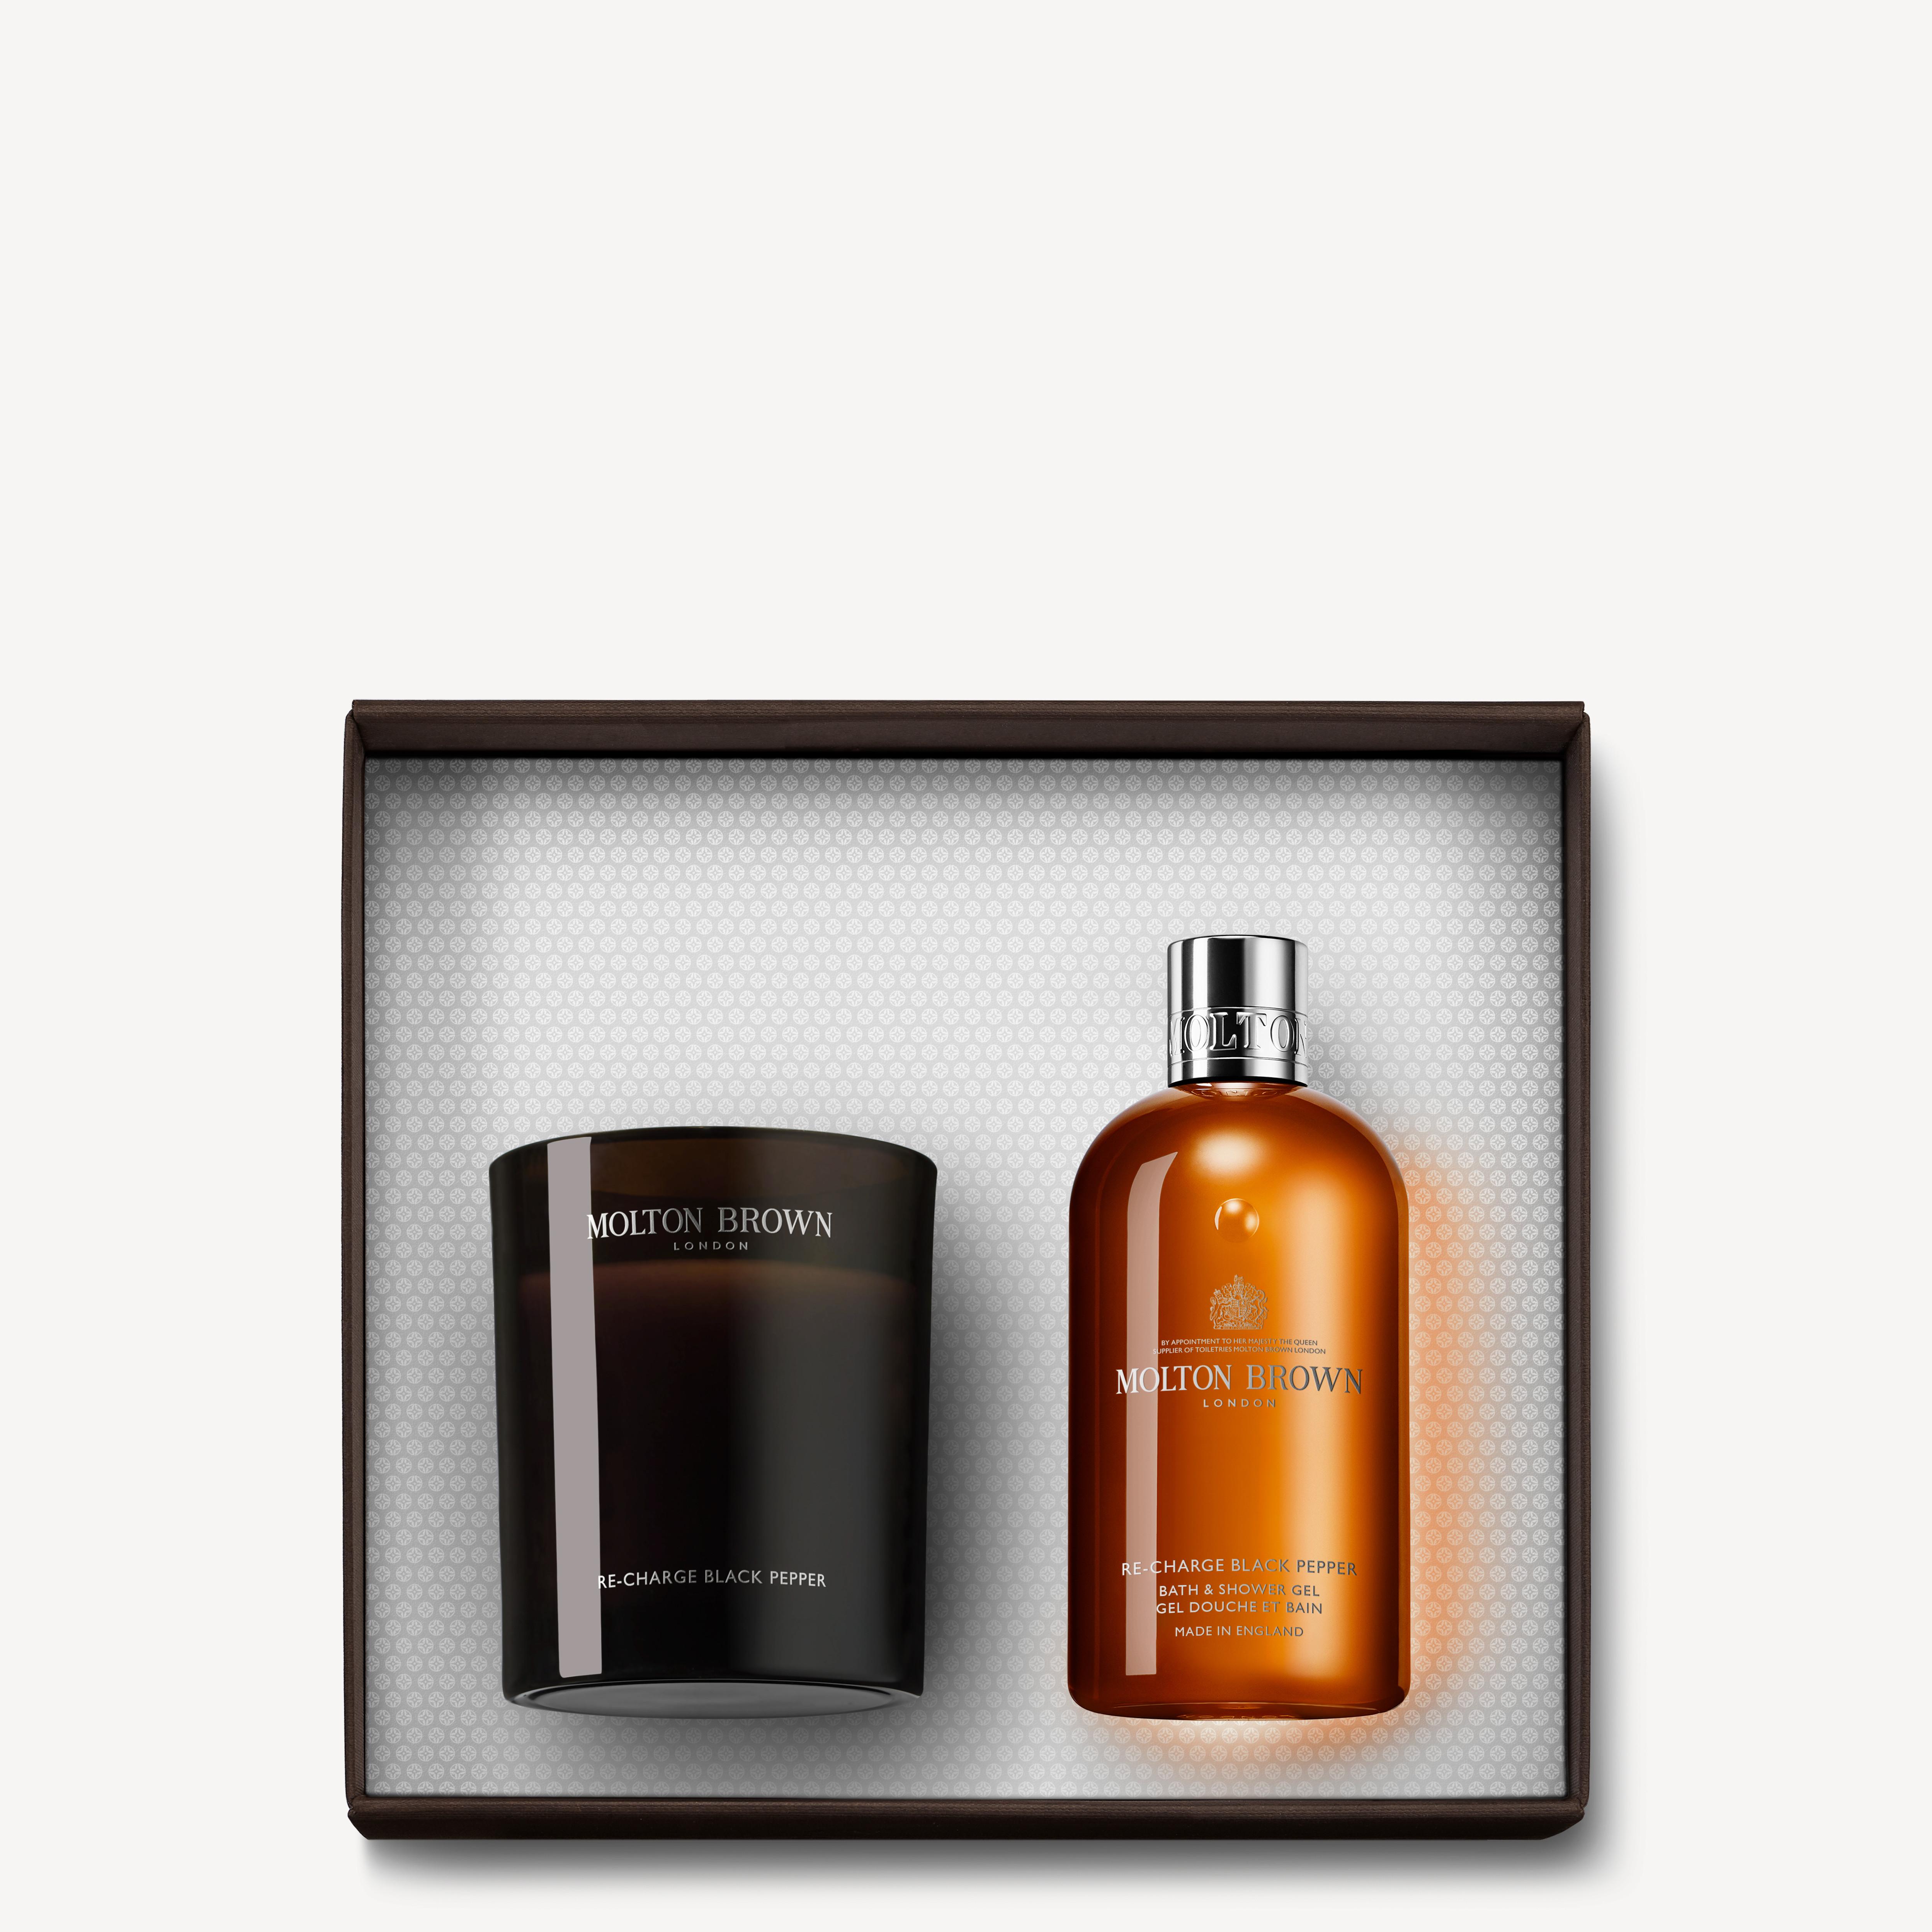 Molton Brown Re-charge Black Pepper Signature Scented Candle & Bath & Shower Gel Gift